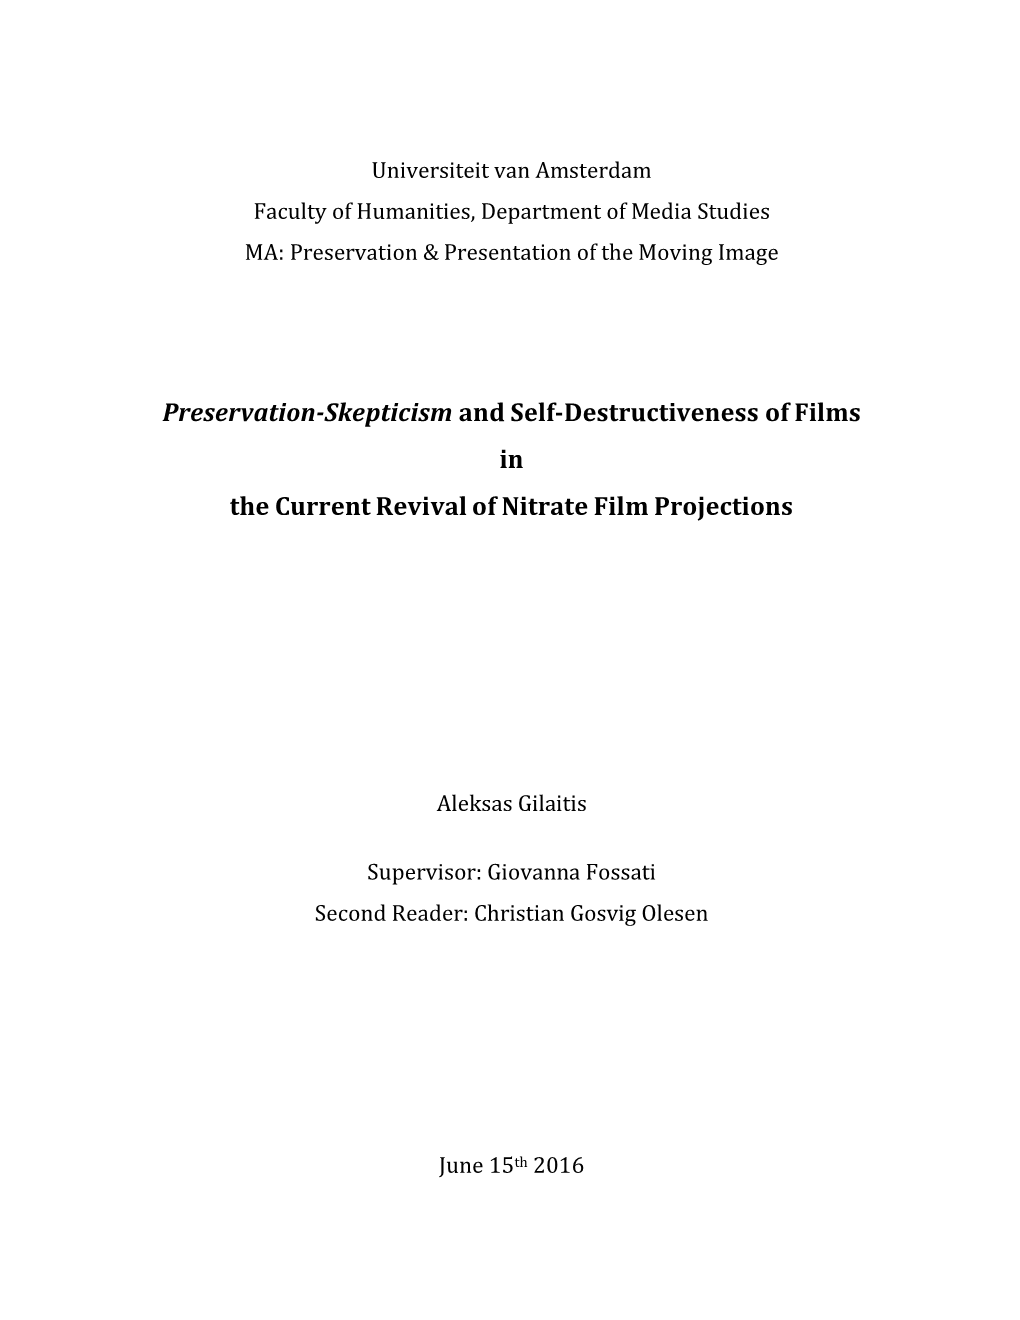 Preservation-Skepticism and Self-Destructiveness of Films in the Current Revival of Nitrate Film Projections